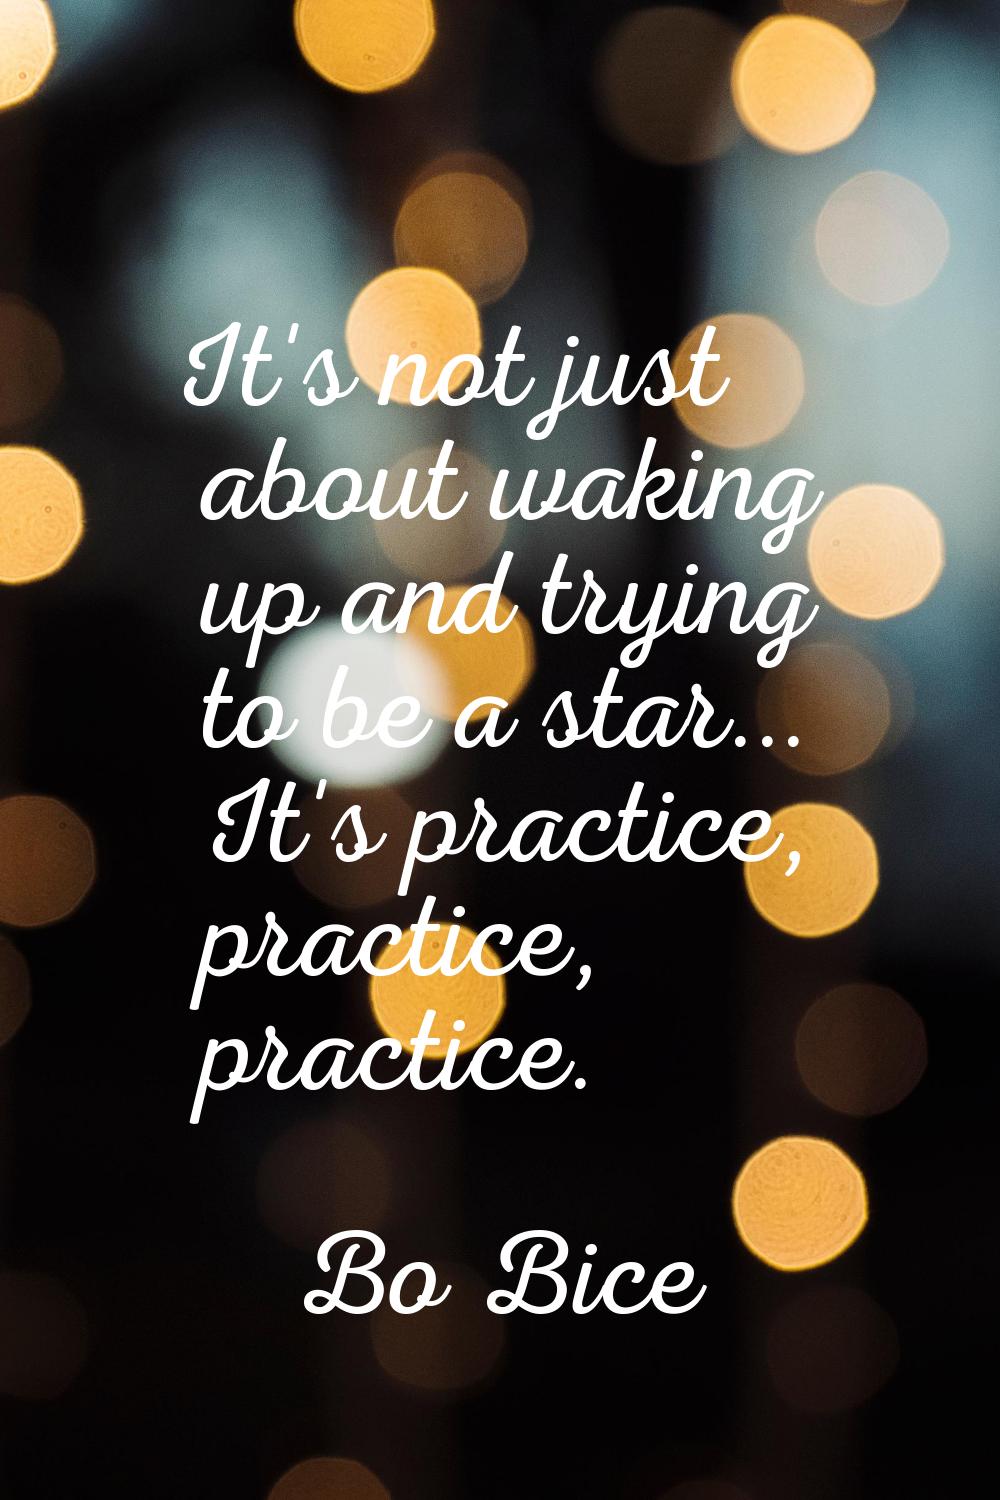 It's not just about waking up and trying to be a star... It's practice, practice, practice.